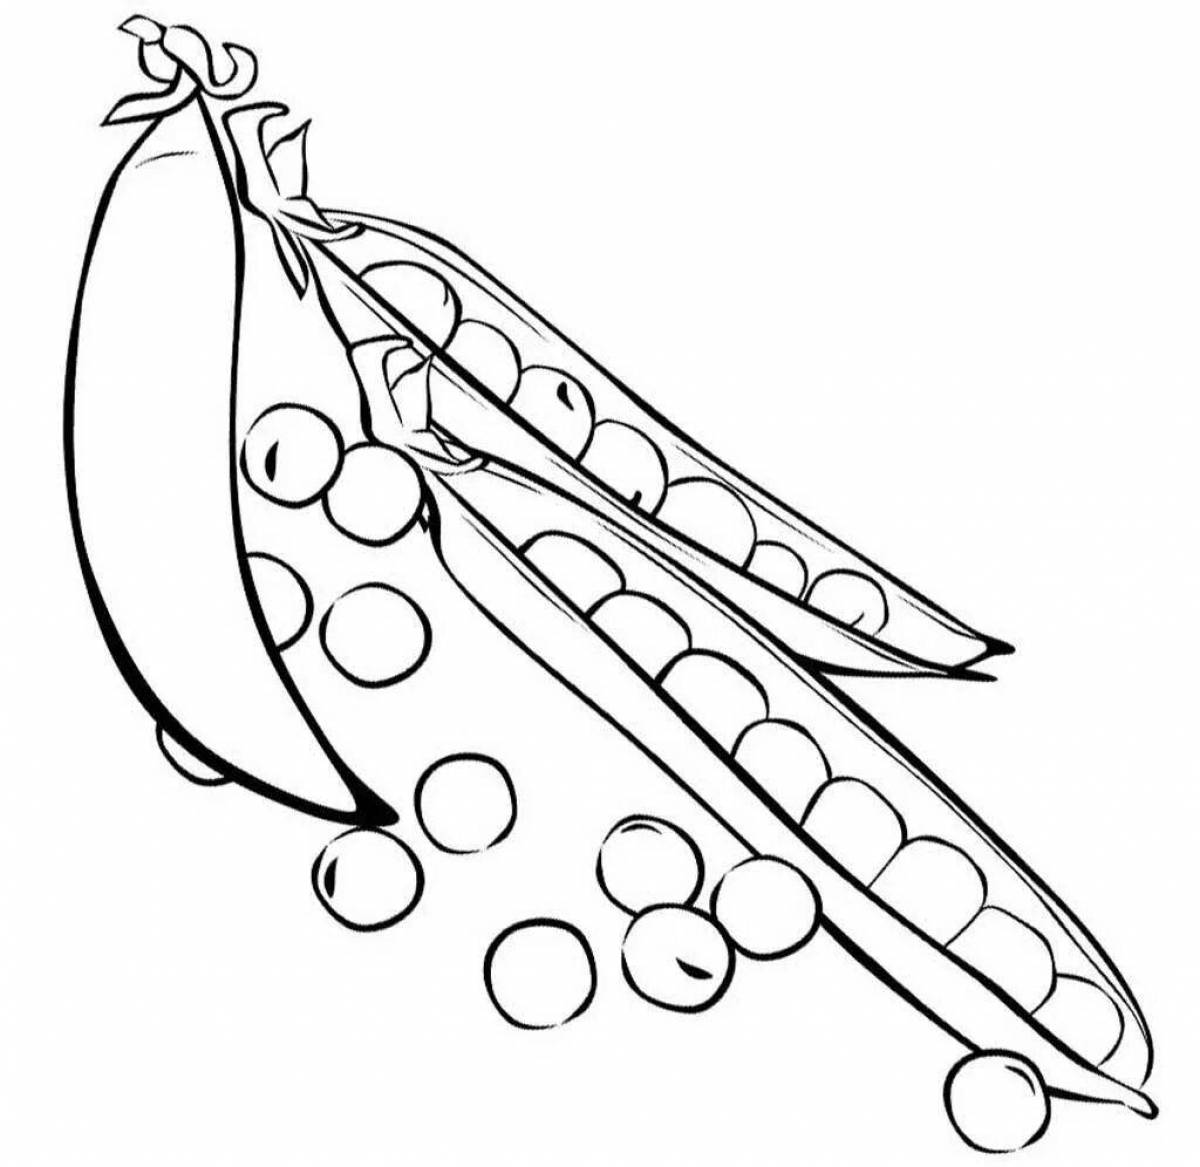 Animated pea coloring page for beginners